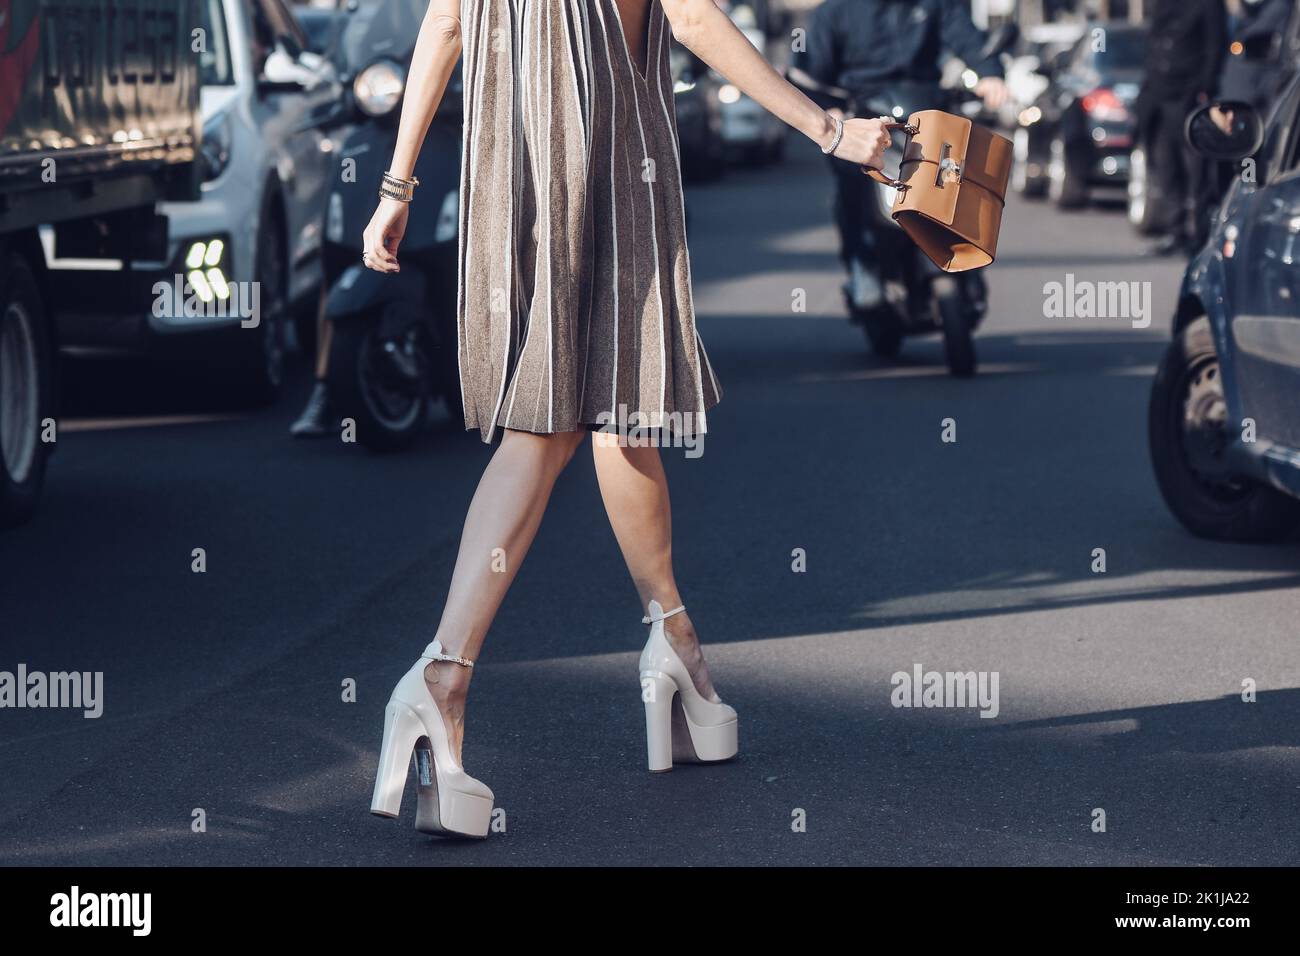 Milan, Italy - February, 25: Street style, woman wearing a beige and brown accordion halter-neck short dress, a brown shiny leather handbag, white var Stock Photo